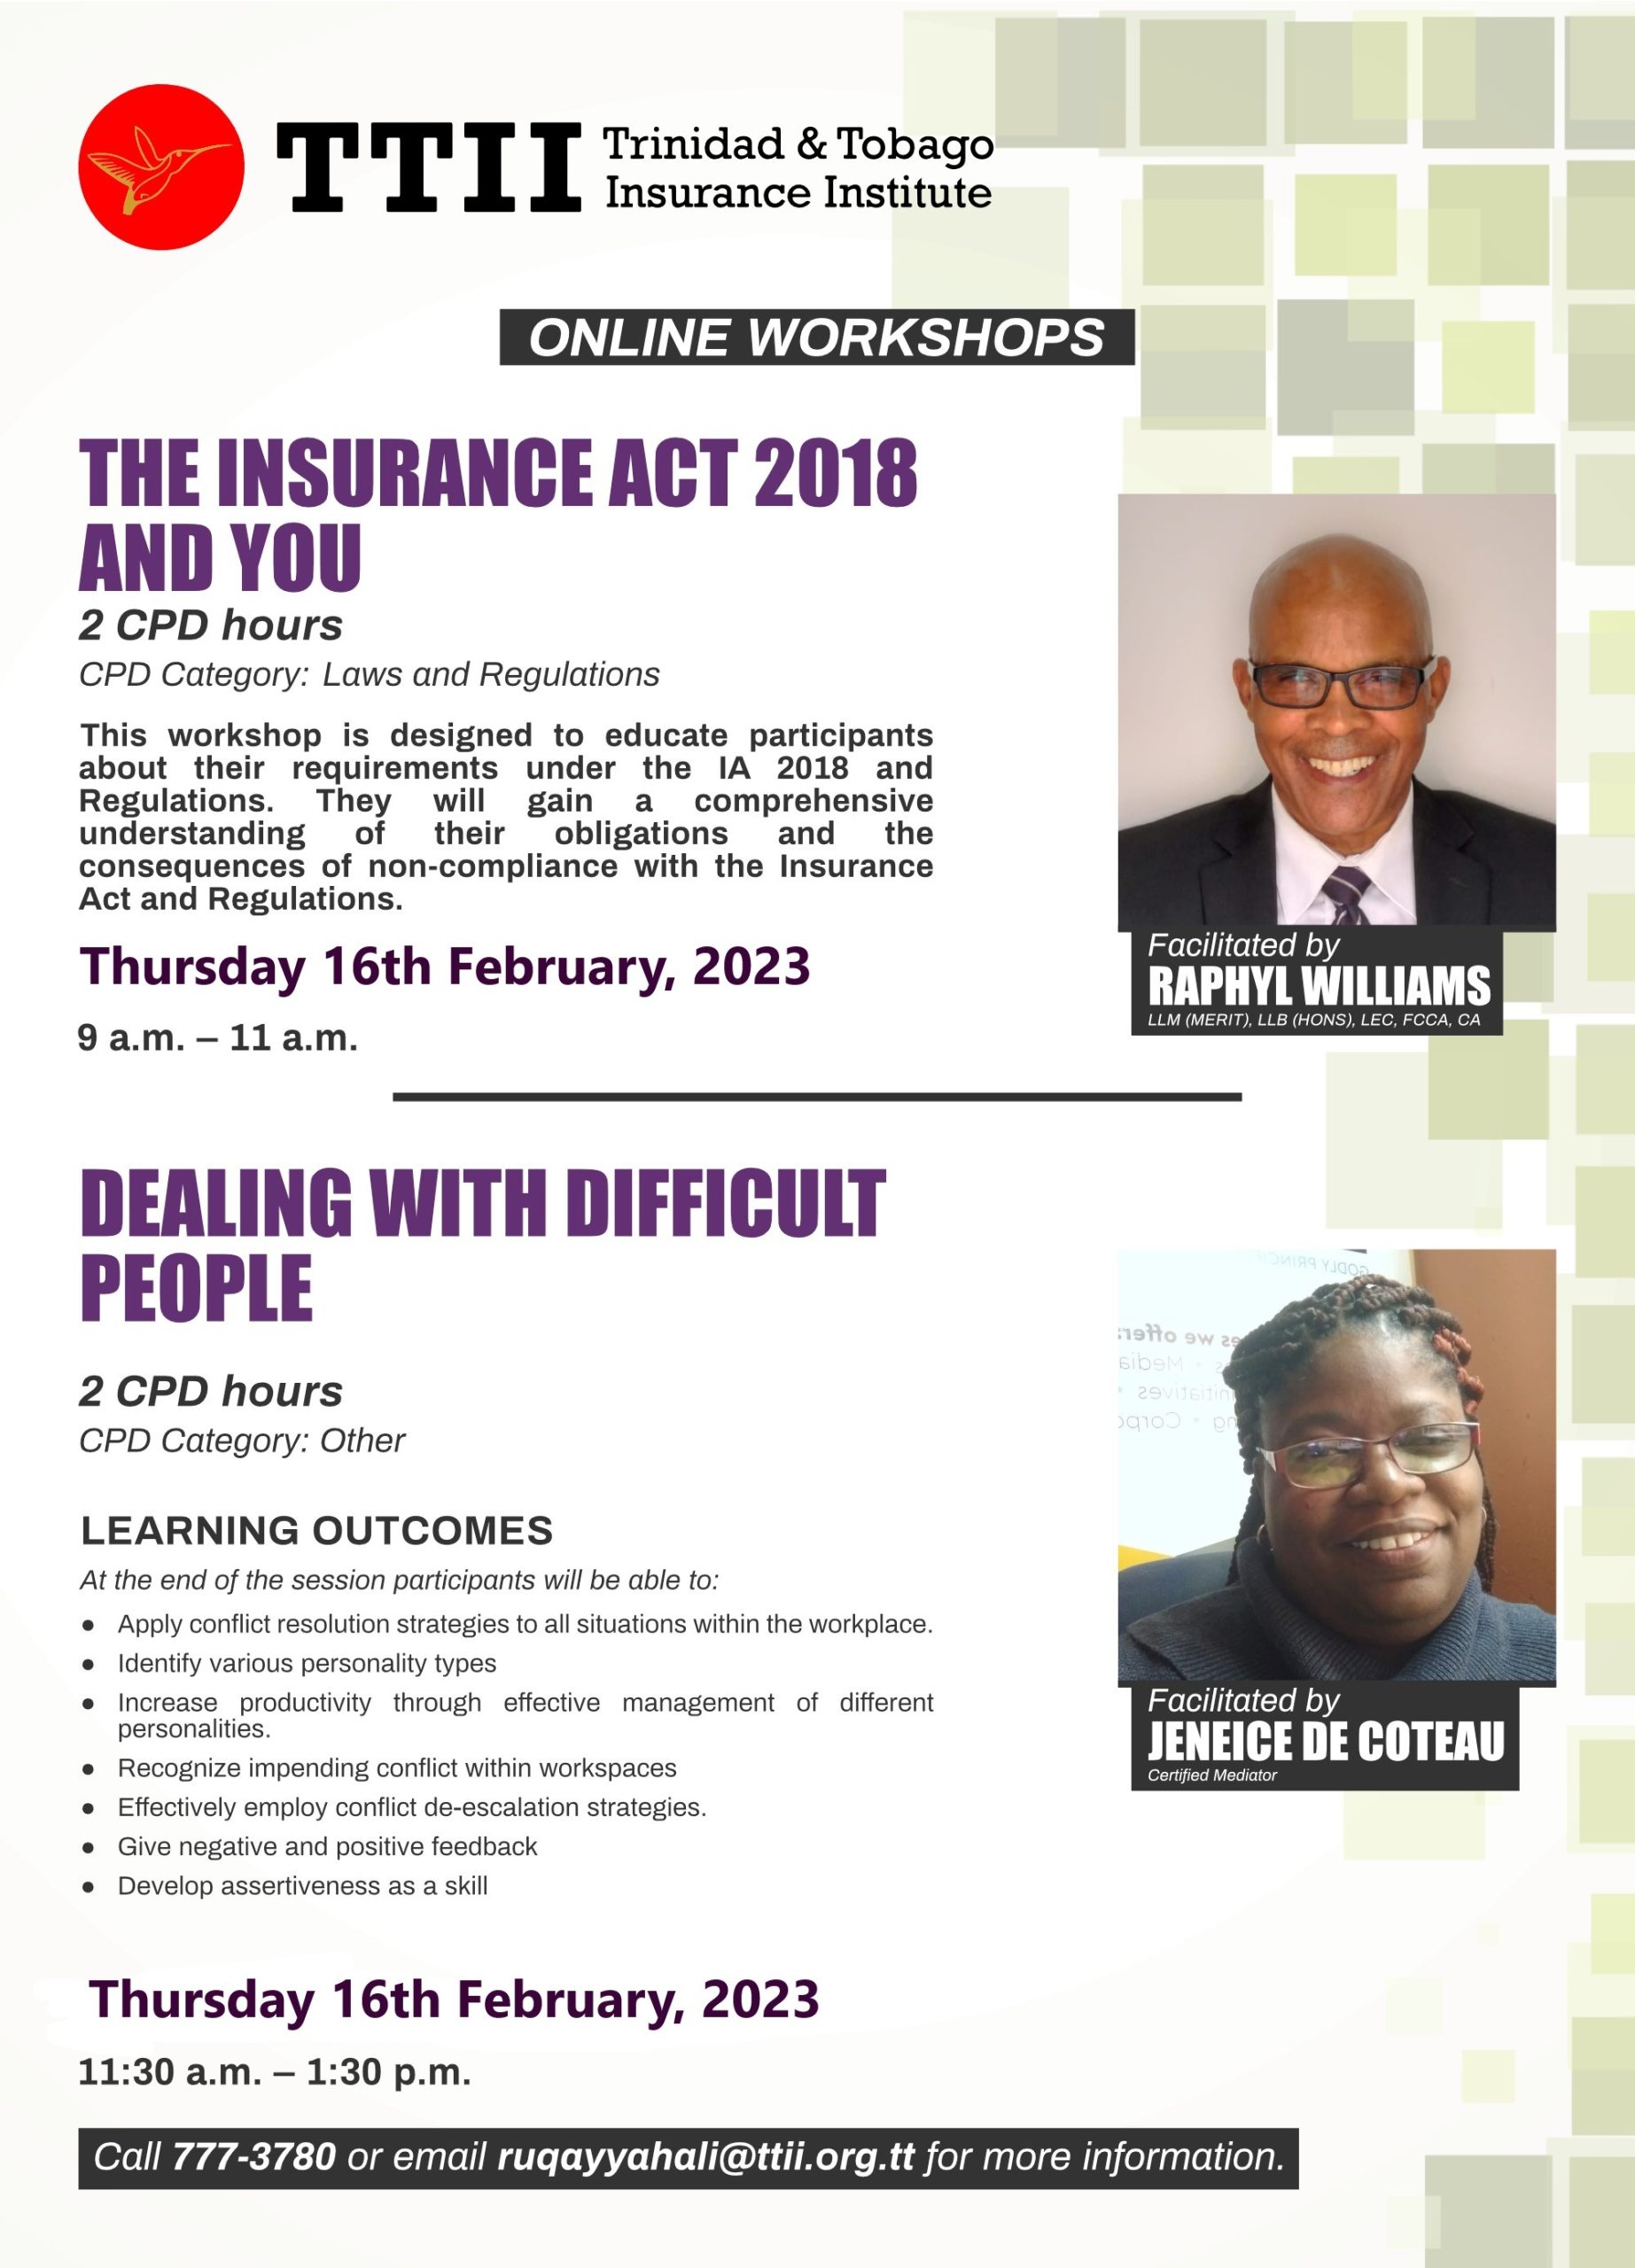 The Insurance Act 2018 & You/Dealing with Difficult People